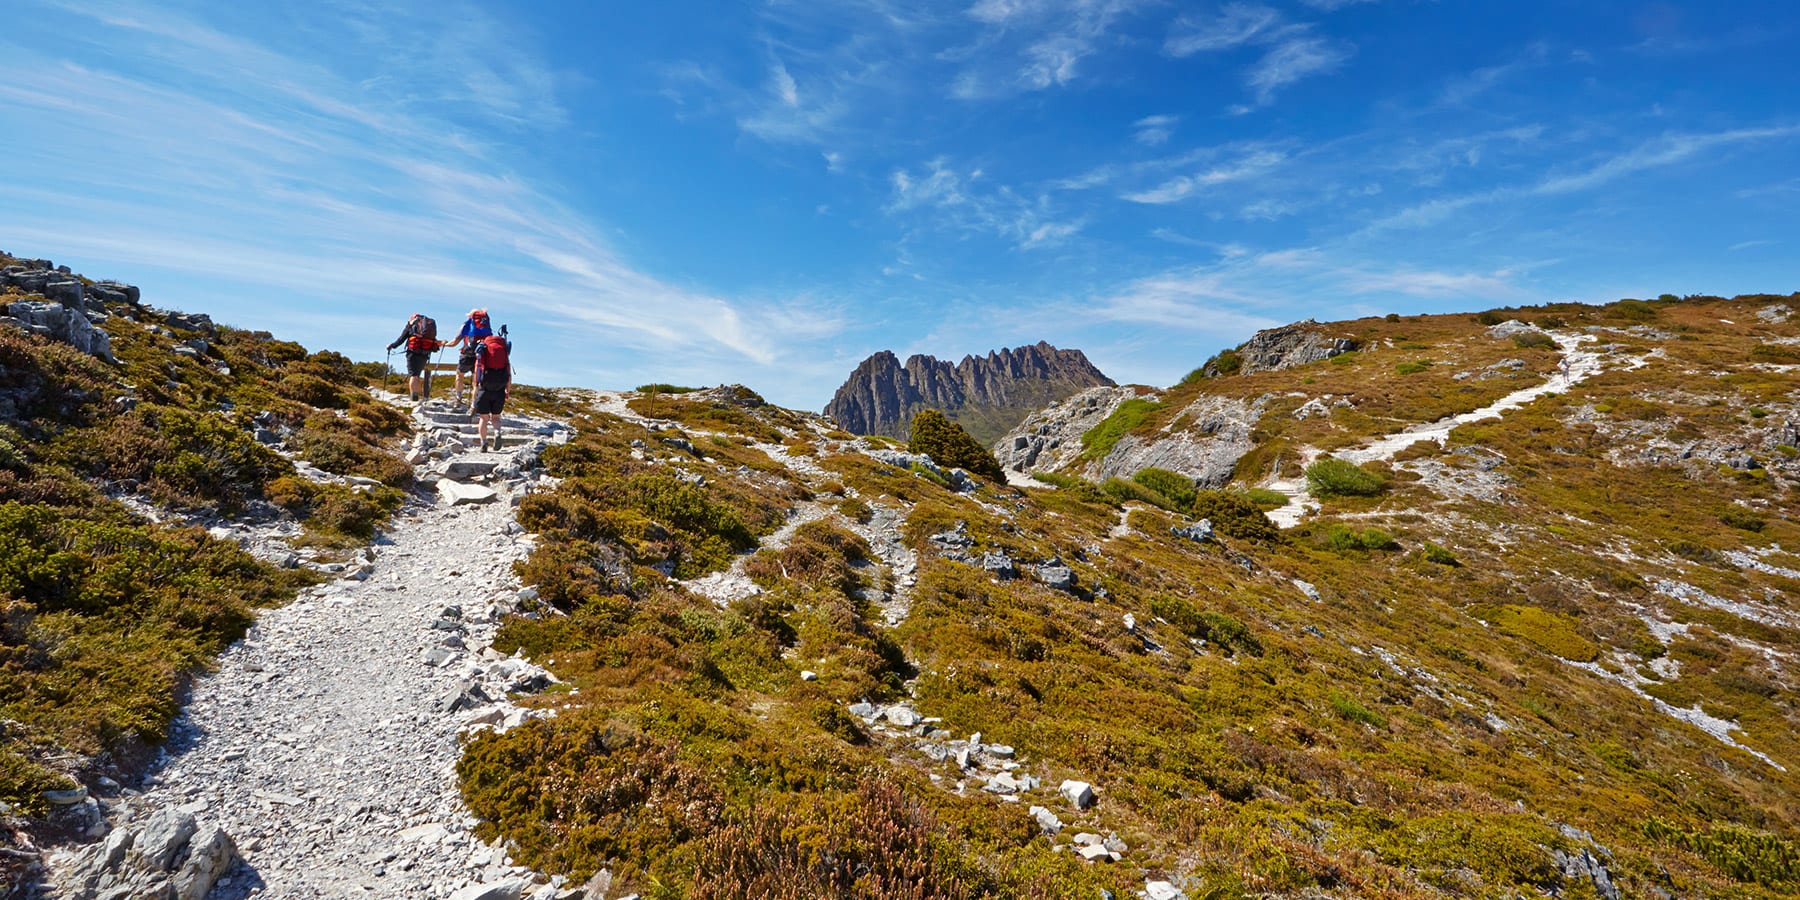 Hikers following rocky trail with Cradle Mountain in the distance, Tasmania, Australia.